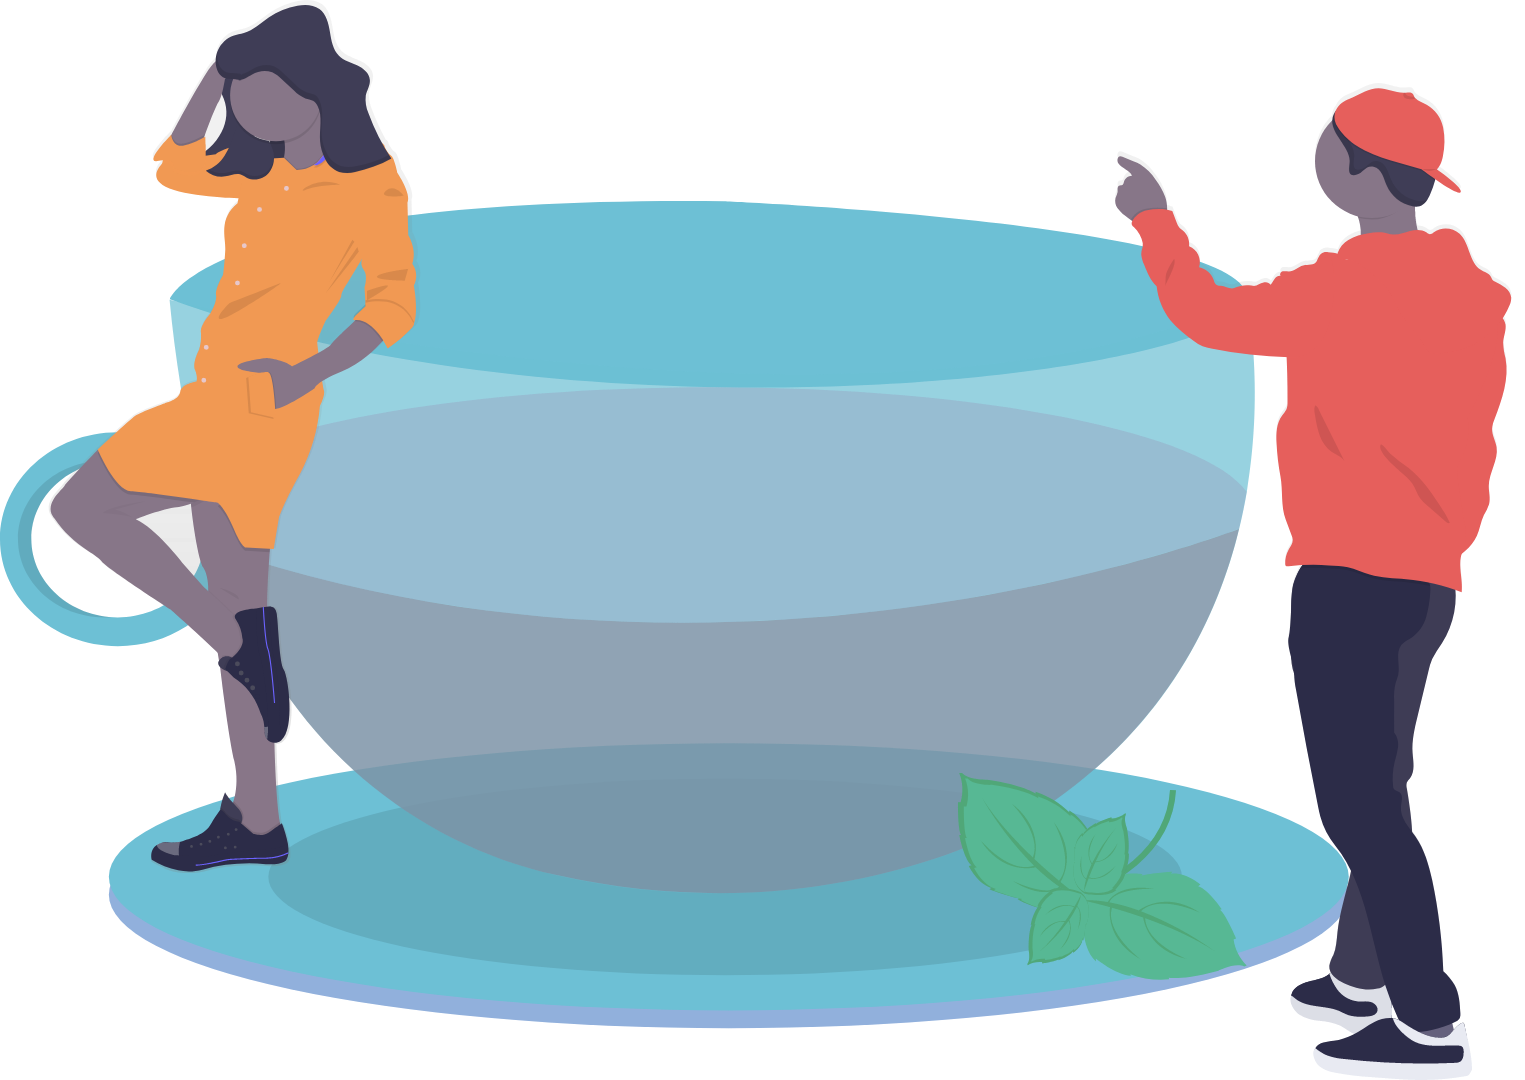 Illustration of a giant tea cup with a black woman leaning against it and a black man pointing towards it.